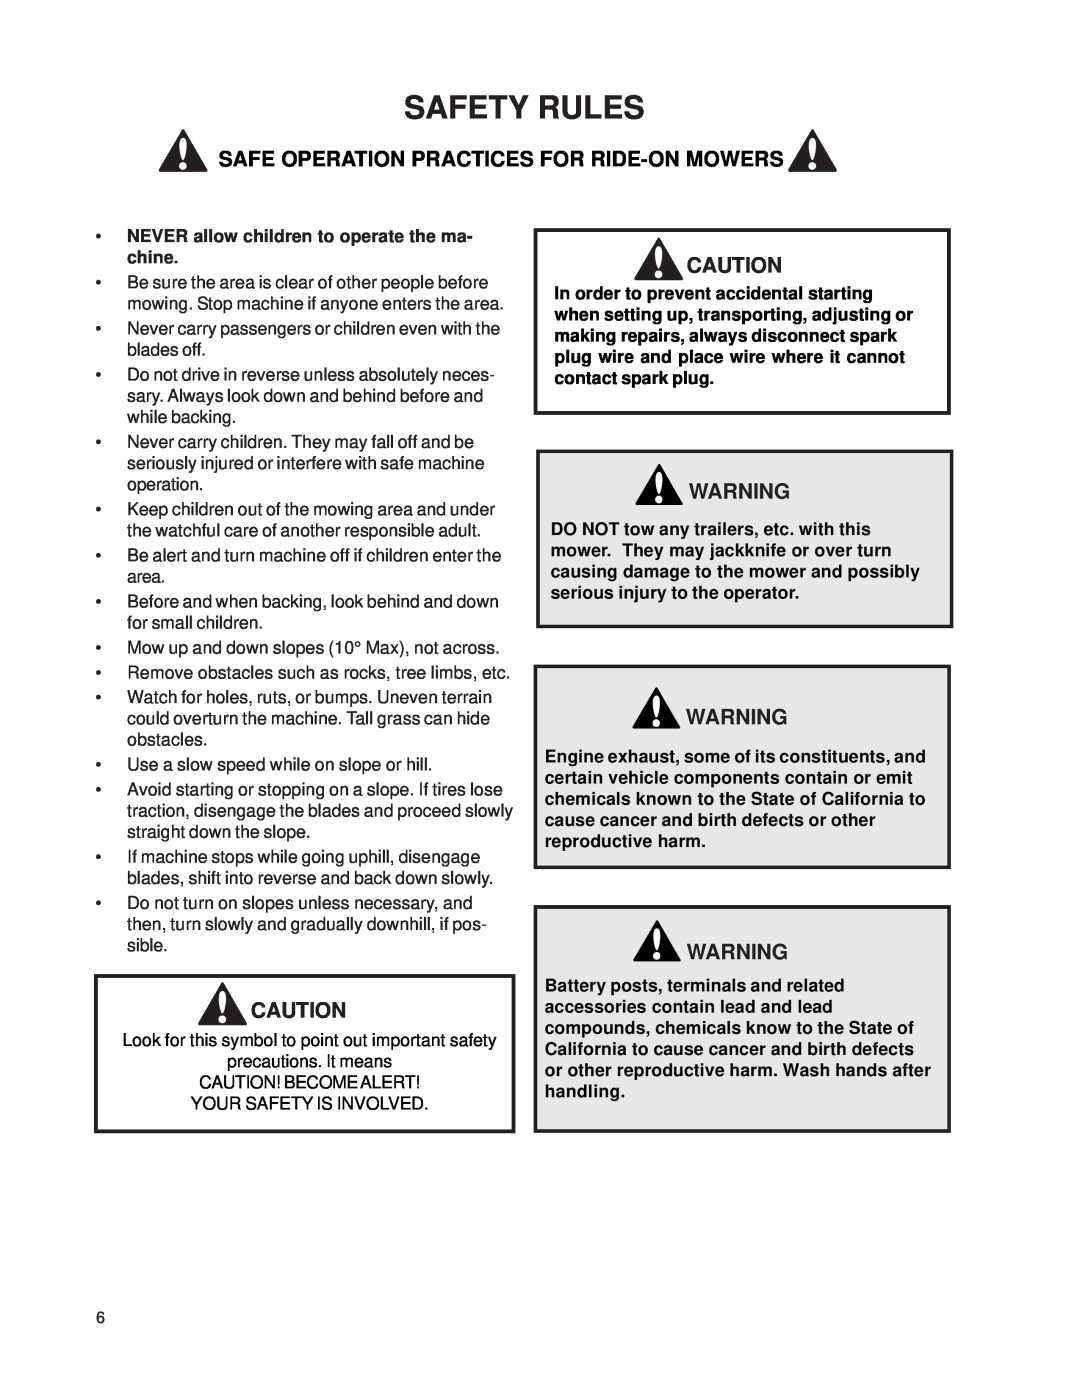 Dixon 539 131305 Safety Rules, Safe Operation Practices For Ride-On Mowers, NEVER allow children to operate the ma- chine 